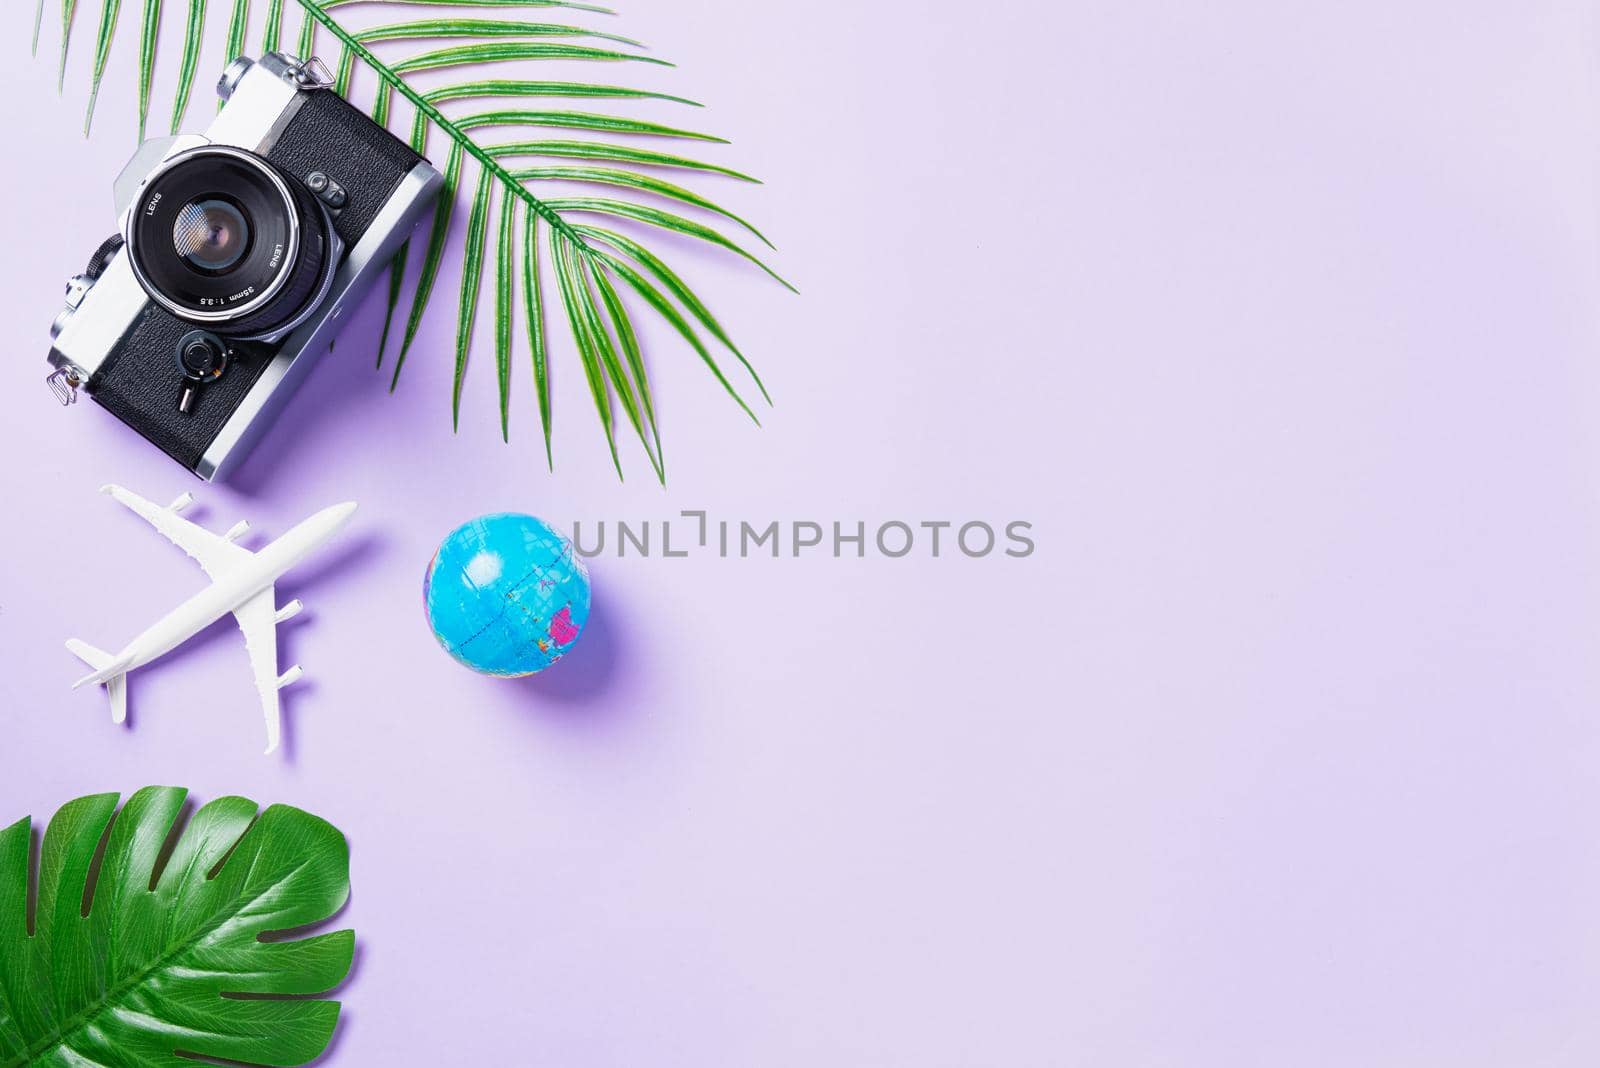 Top view flat lay mockup of retro camera films, airplane, passport, world and traveler accessories isolated on a purple background with copy space, Business trip, and vacation summer travel concept